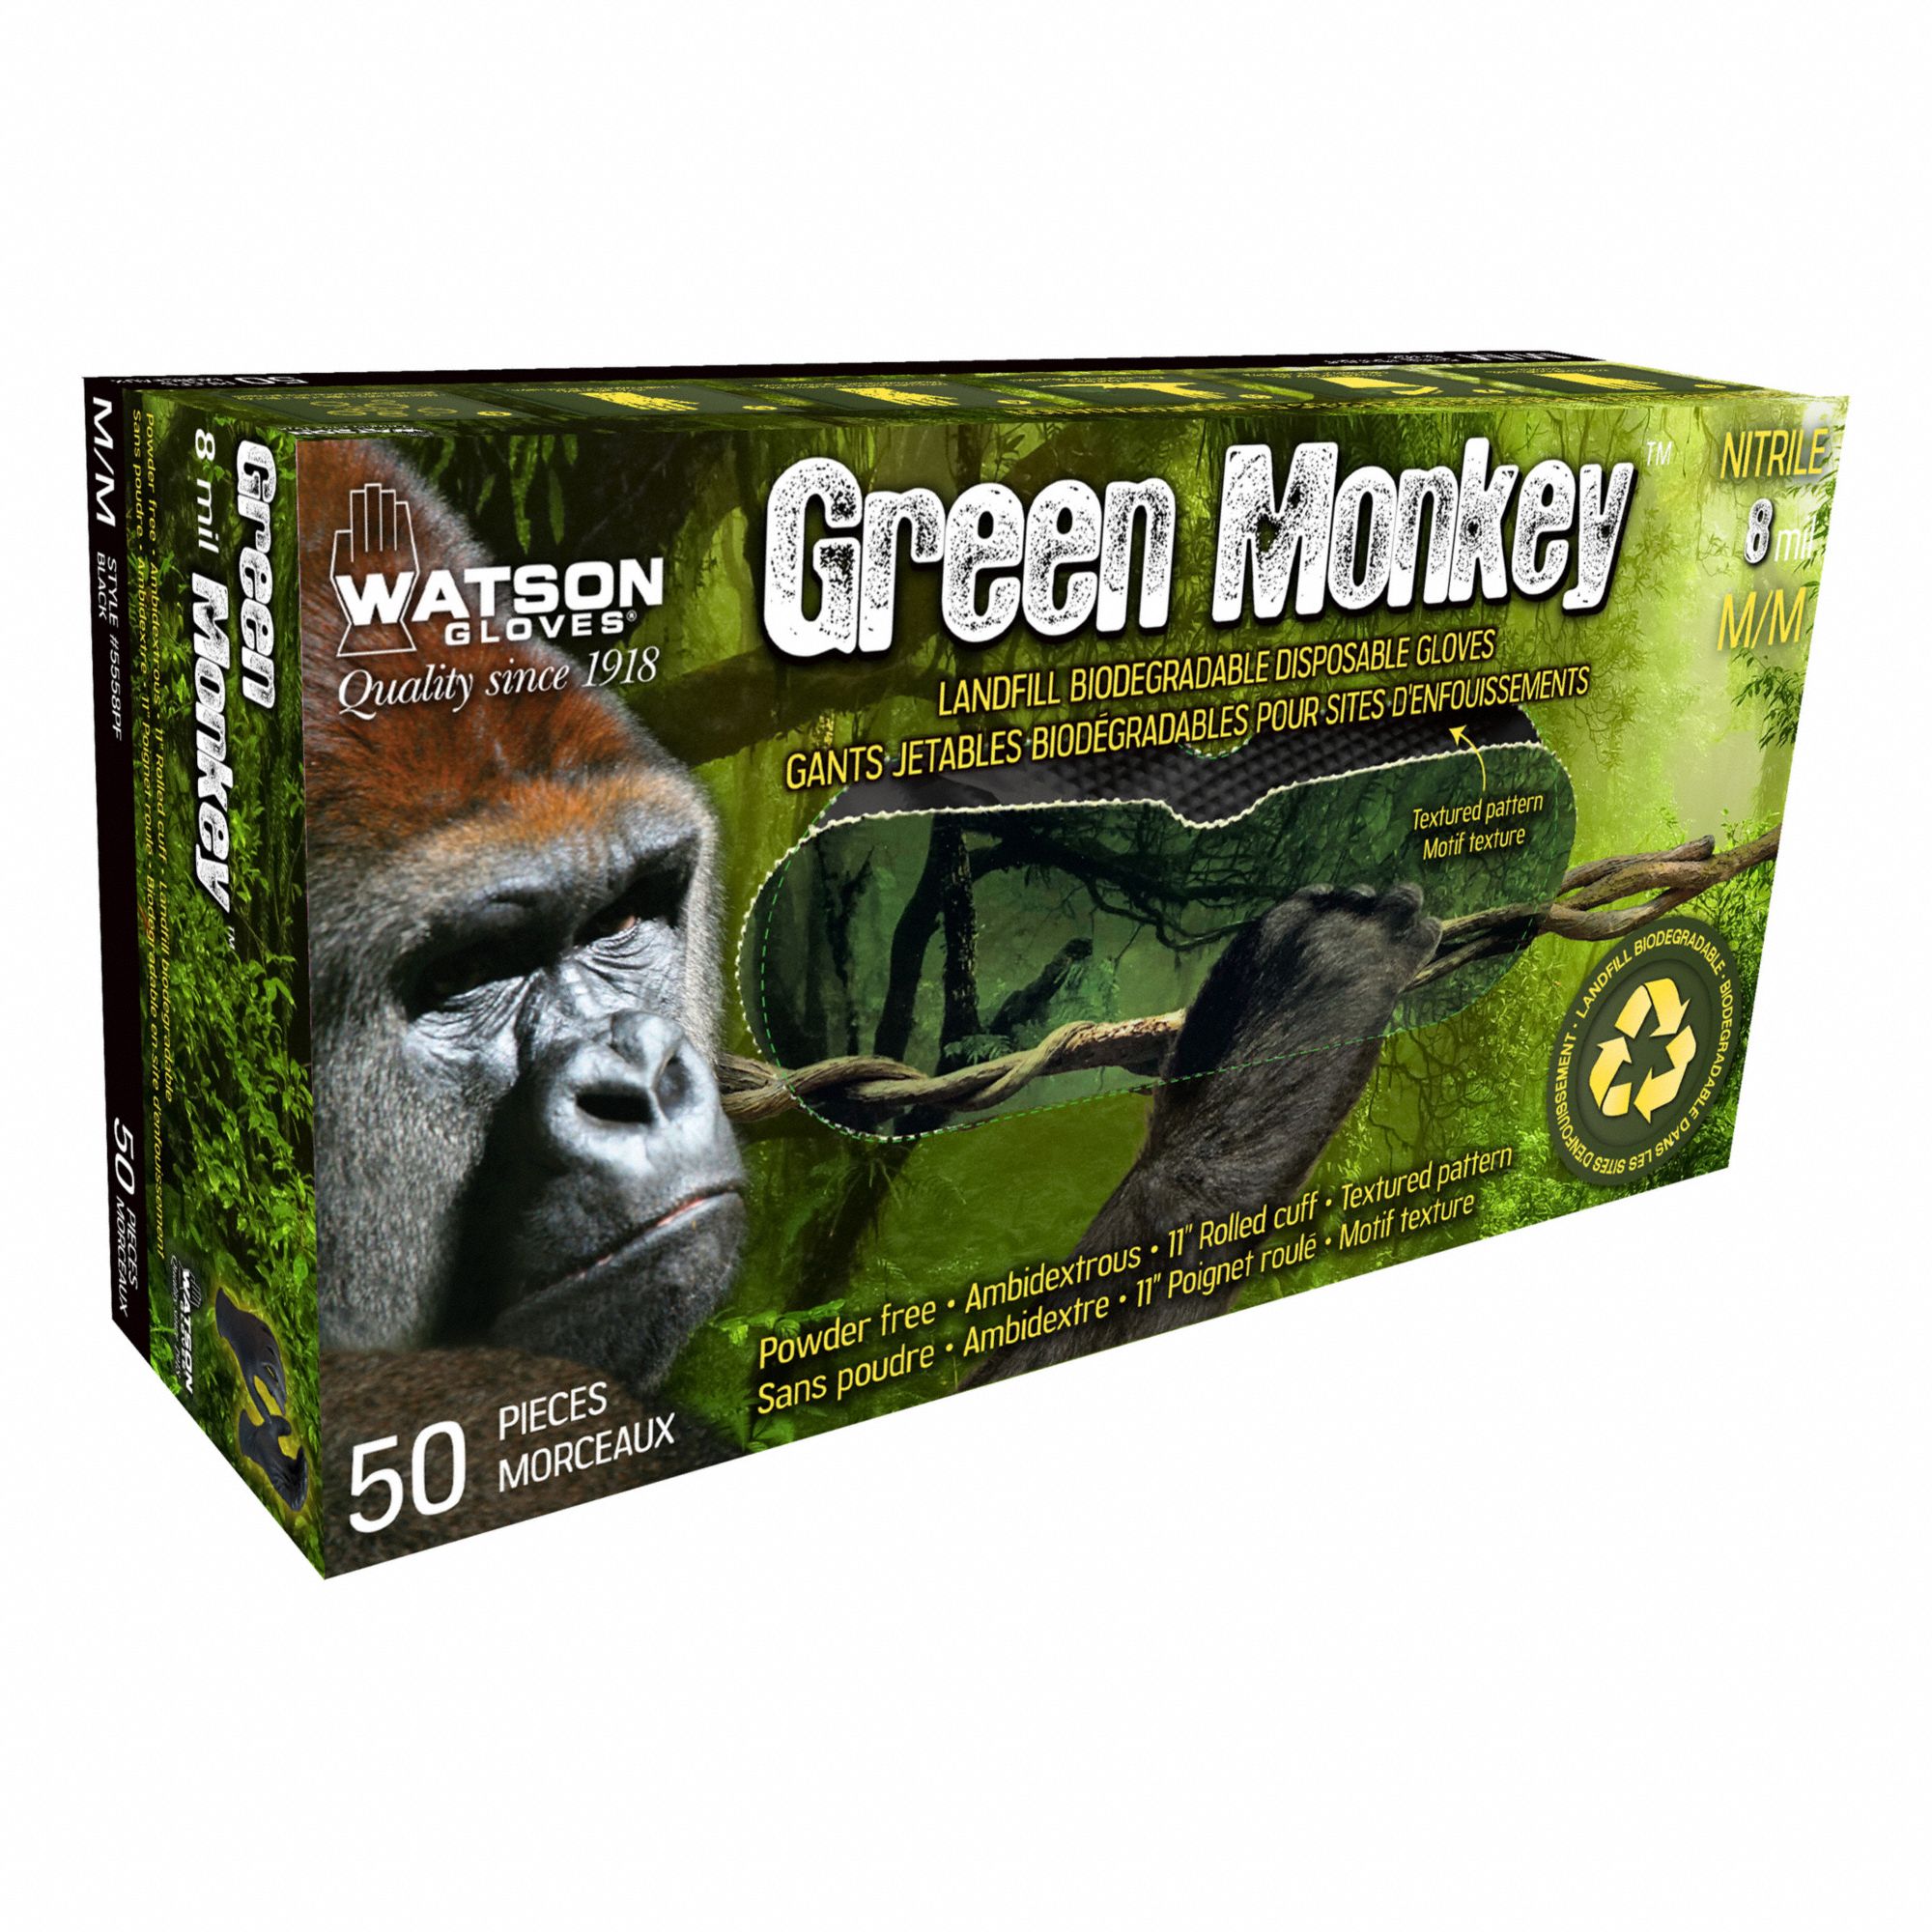 WATSON GLOVES 5558PF GREASE MONKEY GLOVE, BLK, S, NITRILE, 8 MIL,  NON-STERILE, BIODEGRADABLE - General Purpose Disposable Gloves - WAT5558PFS